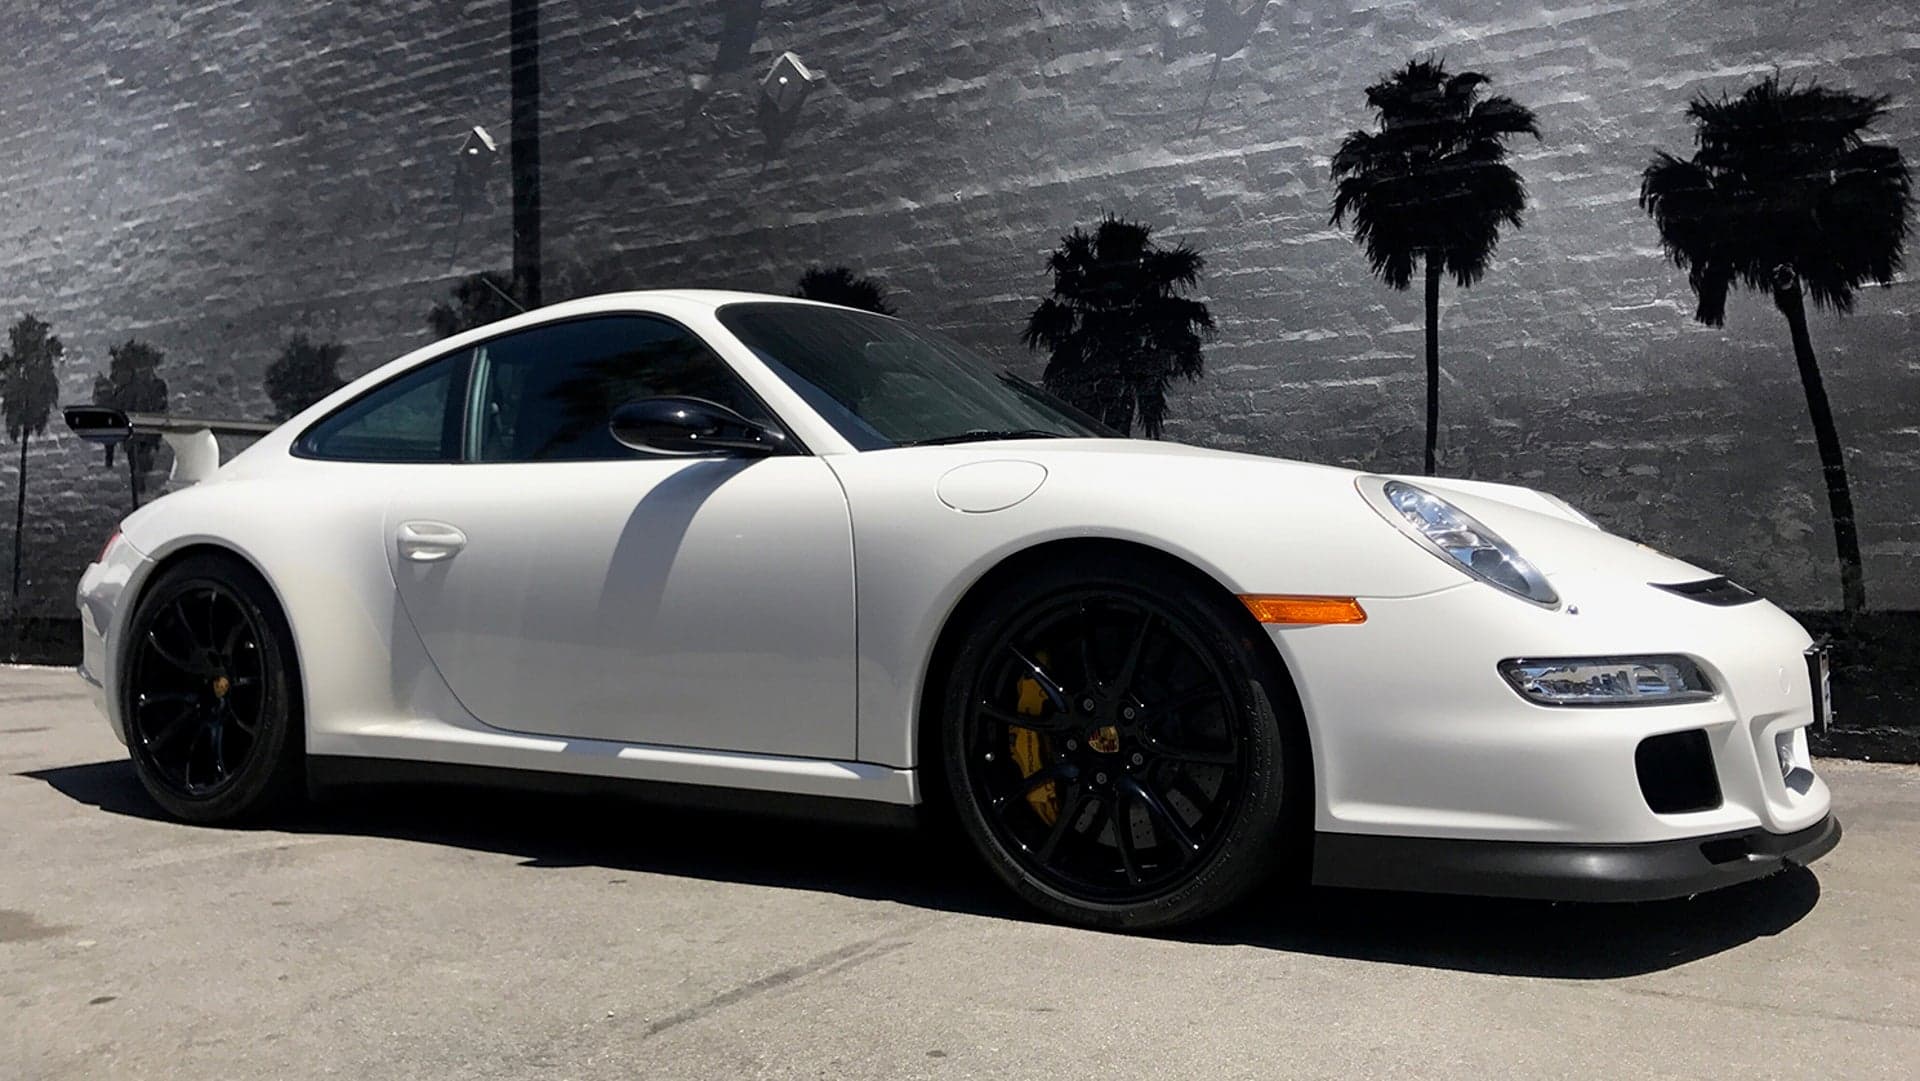 Jerry Seinfeld’s 2007 Porsche 911 GT3 RS Headed to Auction